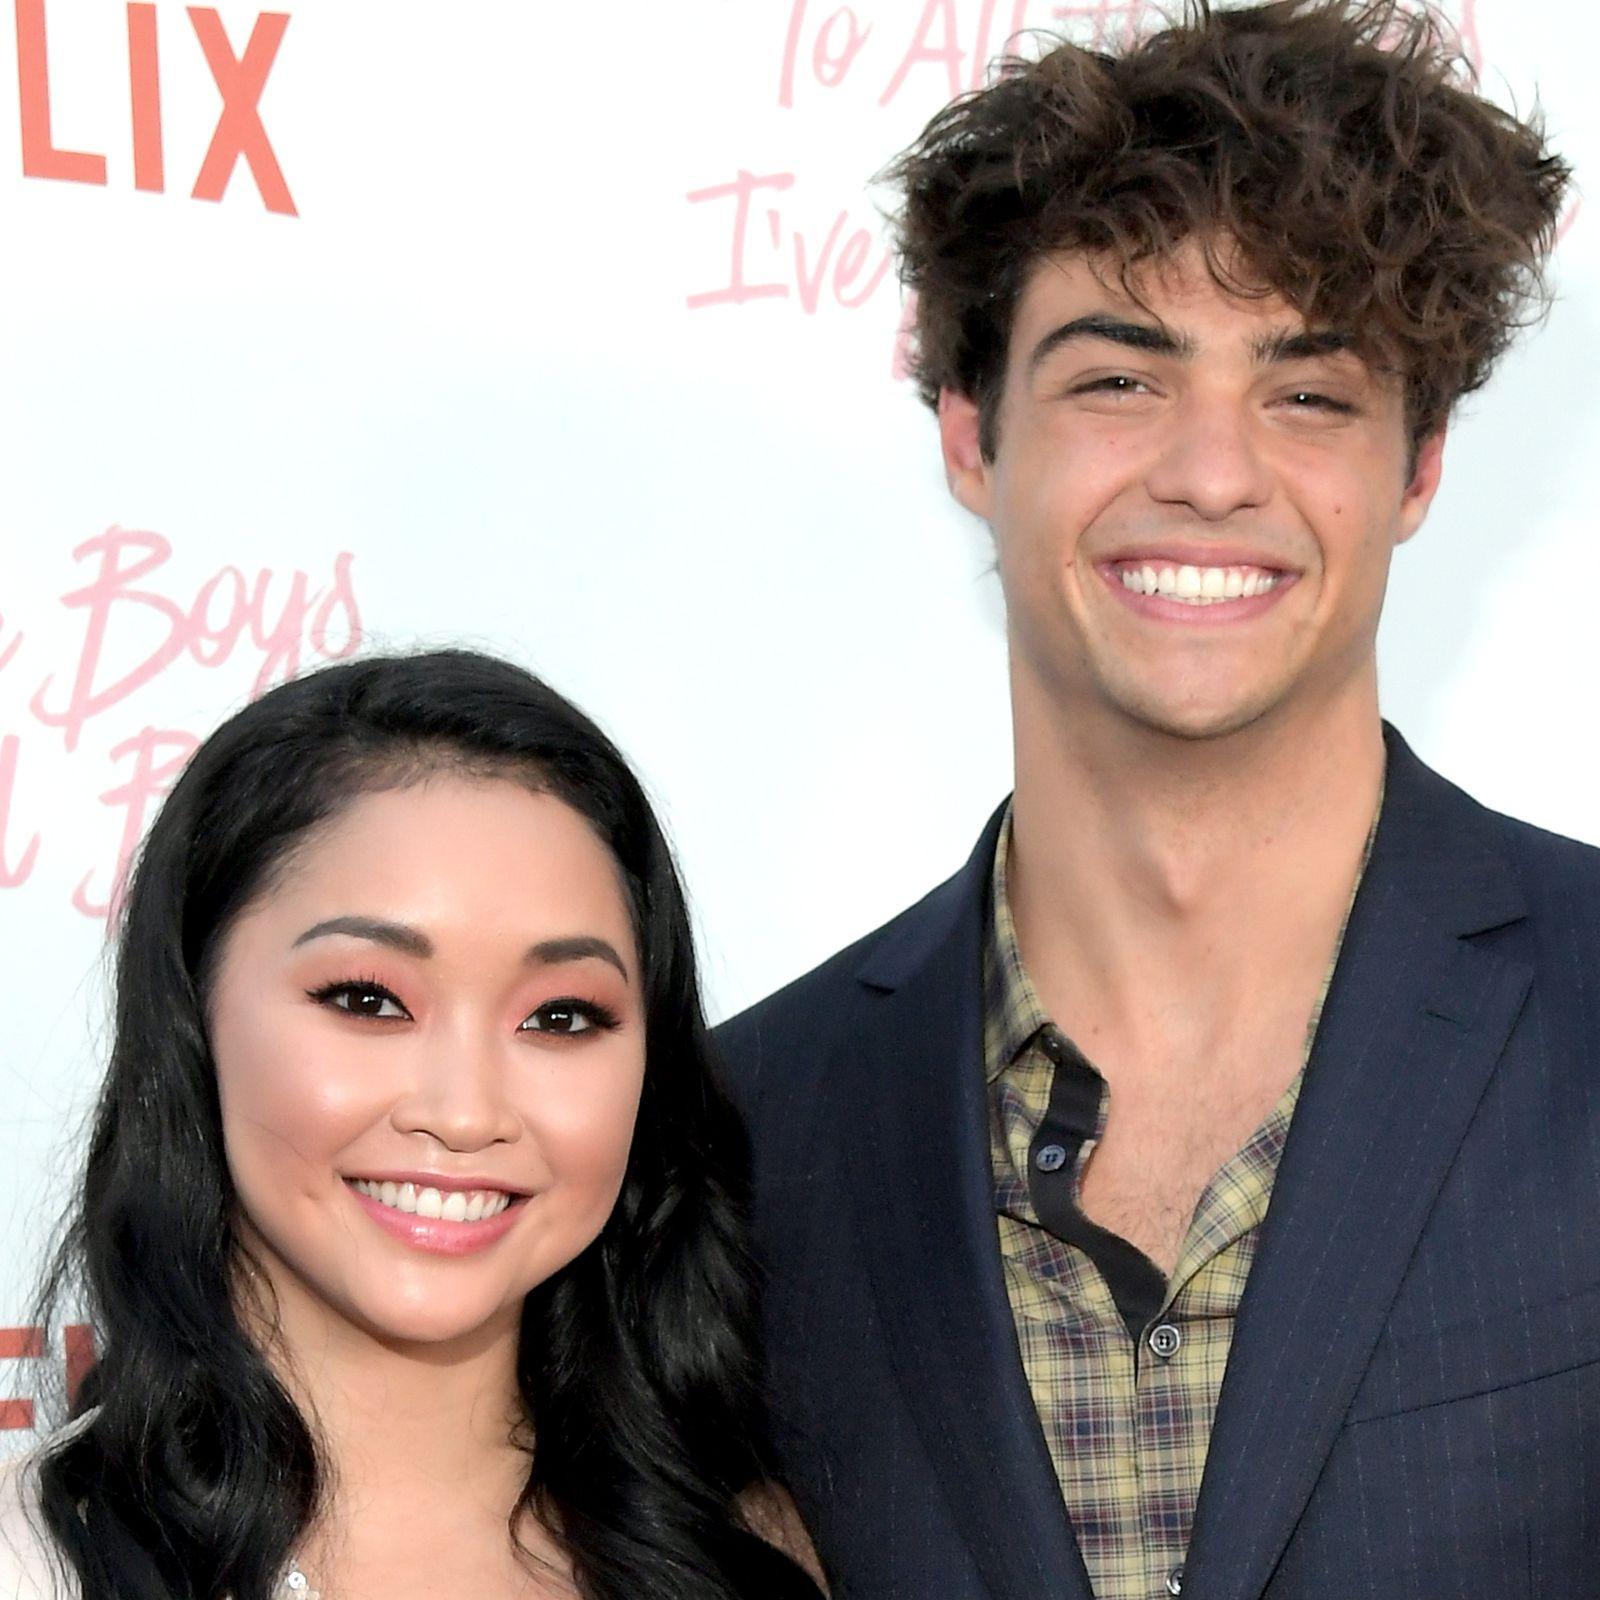 To All the Boys I've Loved Before' is getting a sequel